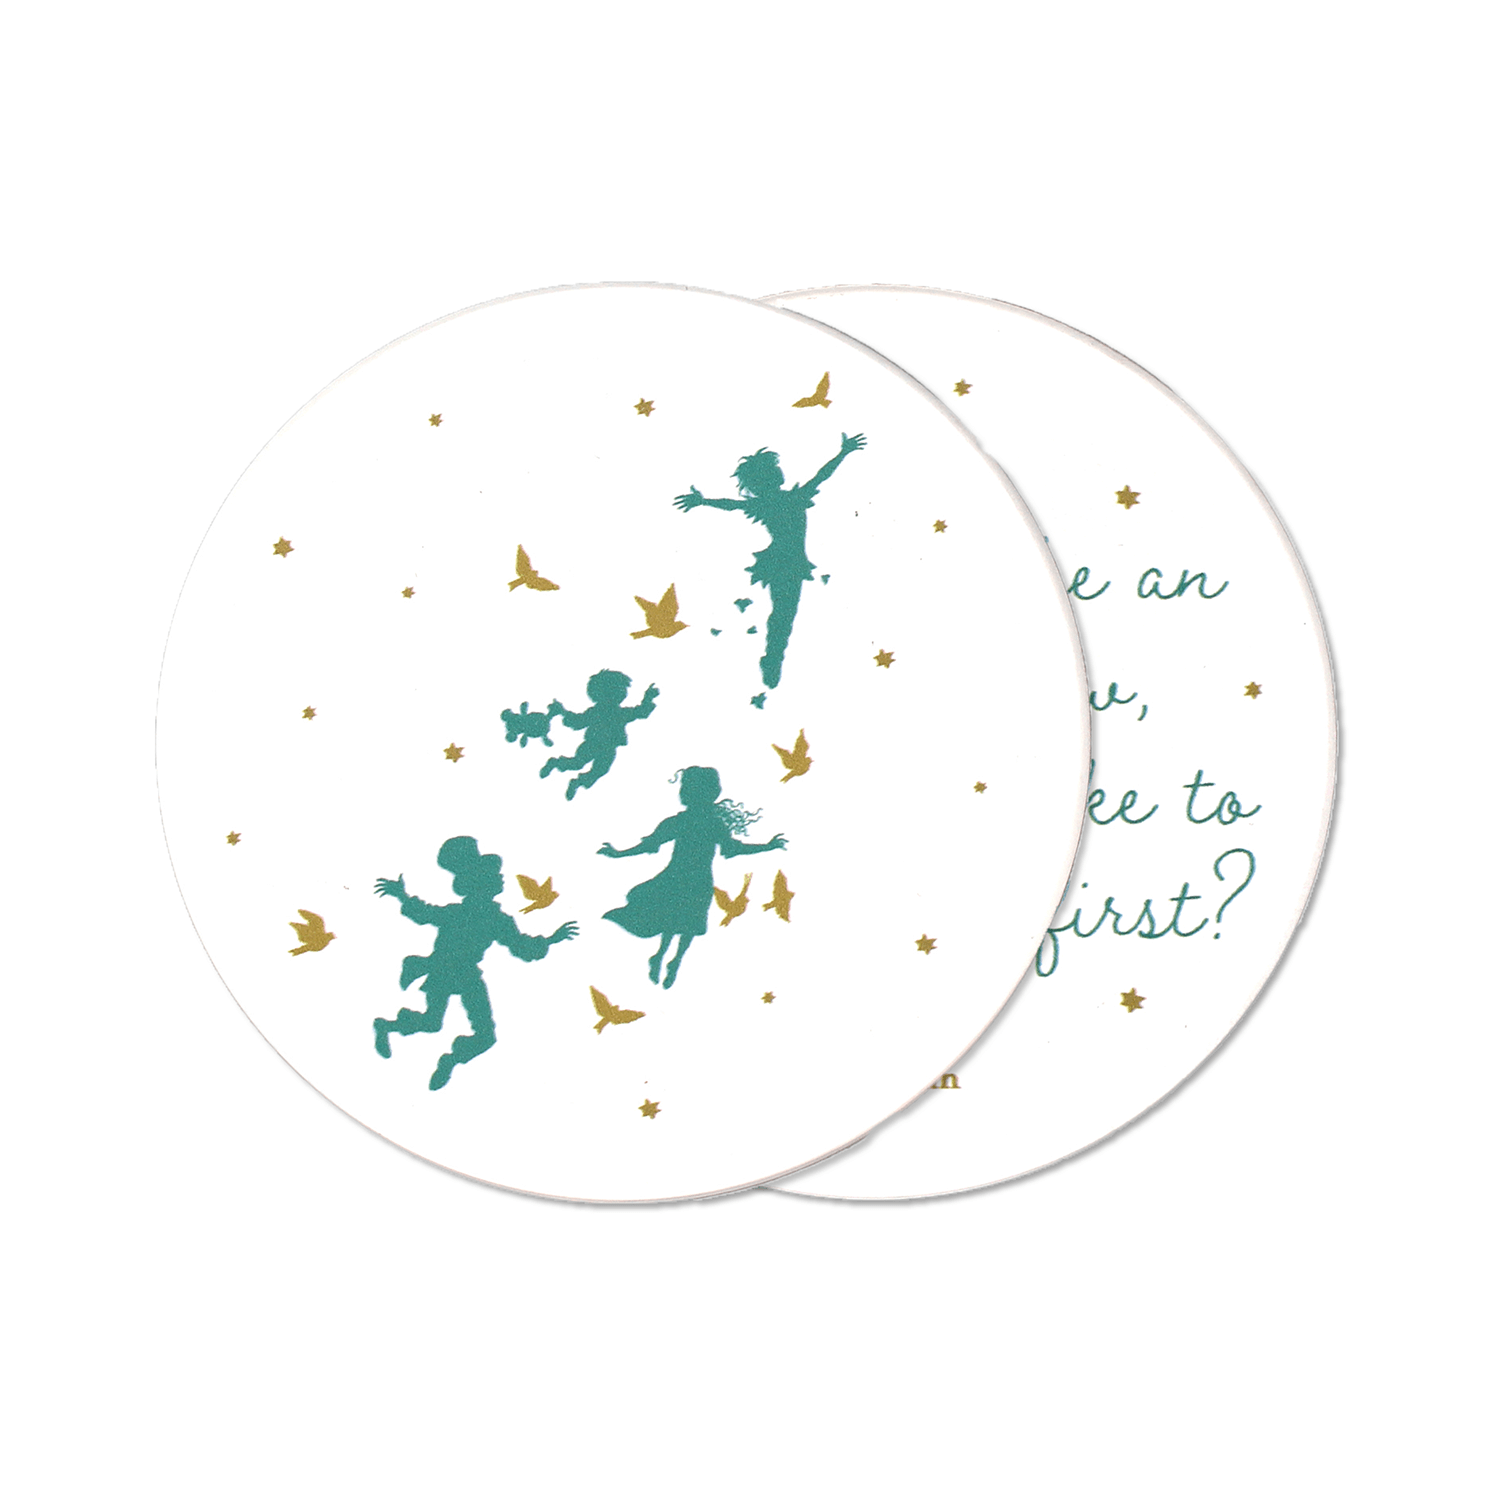 Two Peter Pan and Wendy inspired coasters